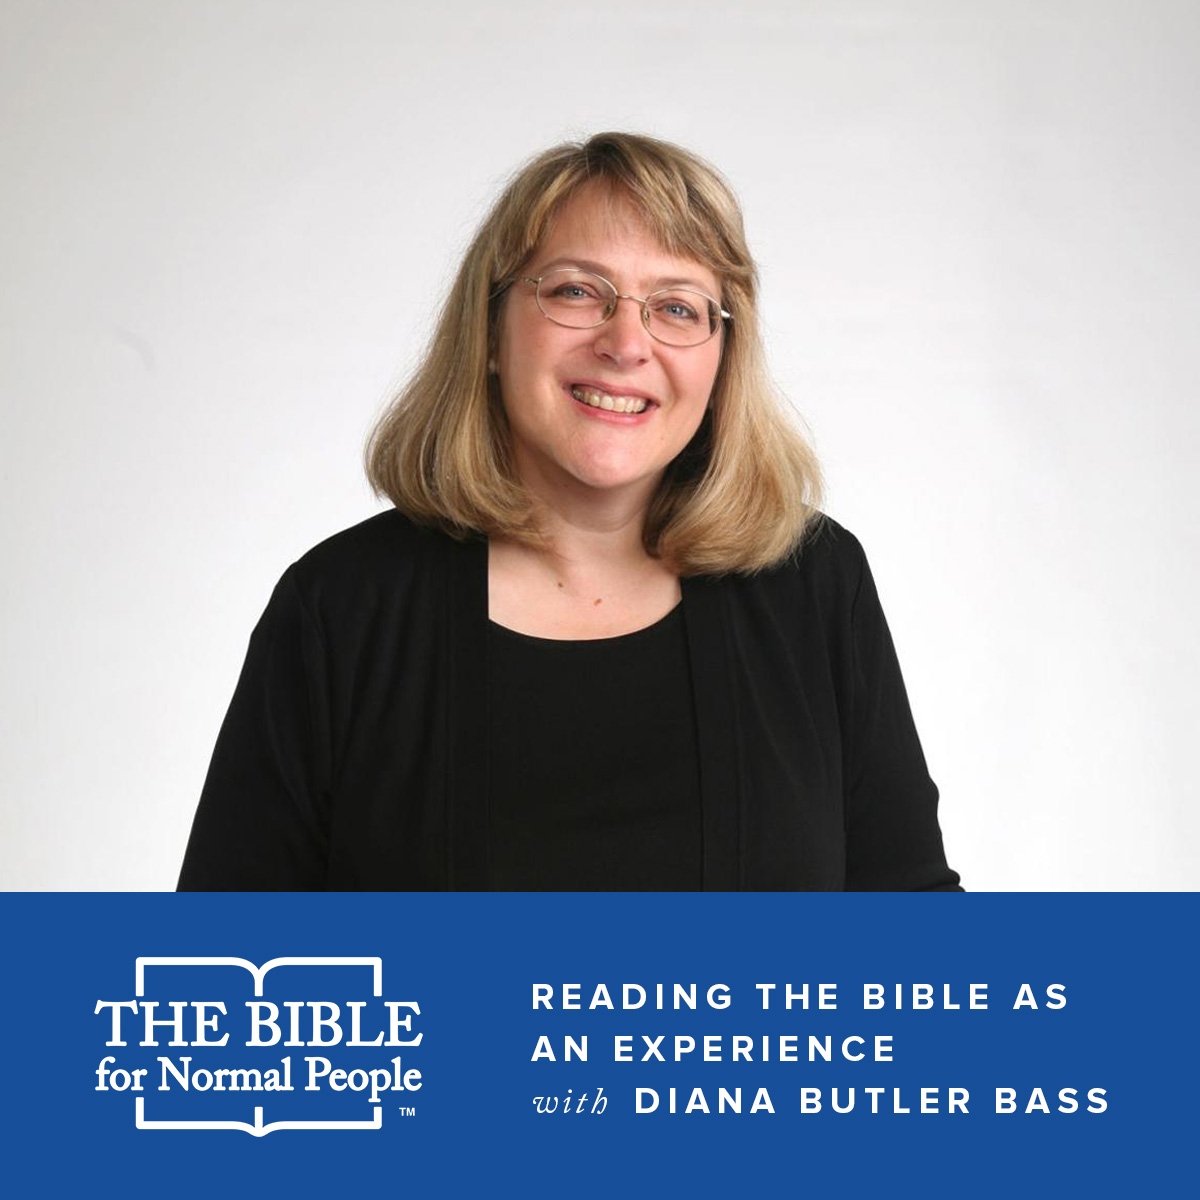 Interview with Diana Butler Bass: Reading the Bible as an Experience & Relationship